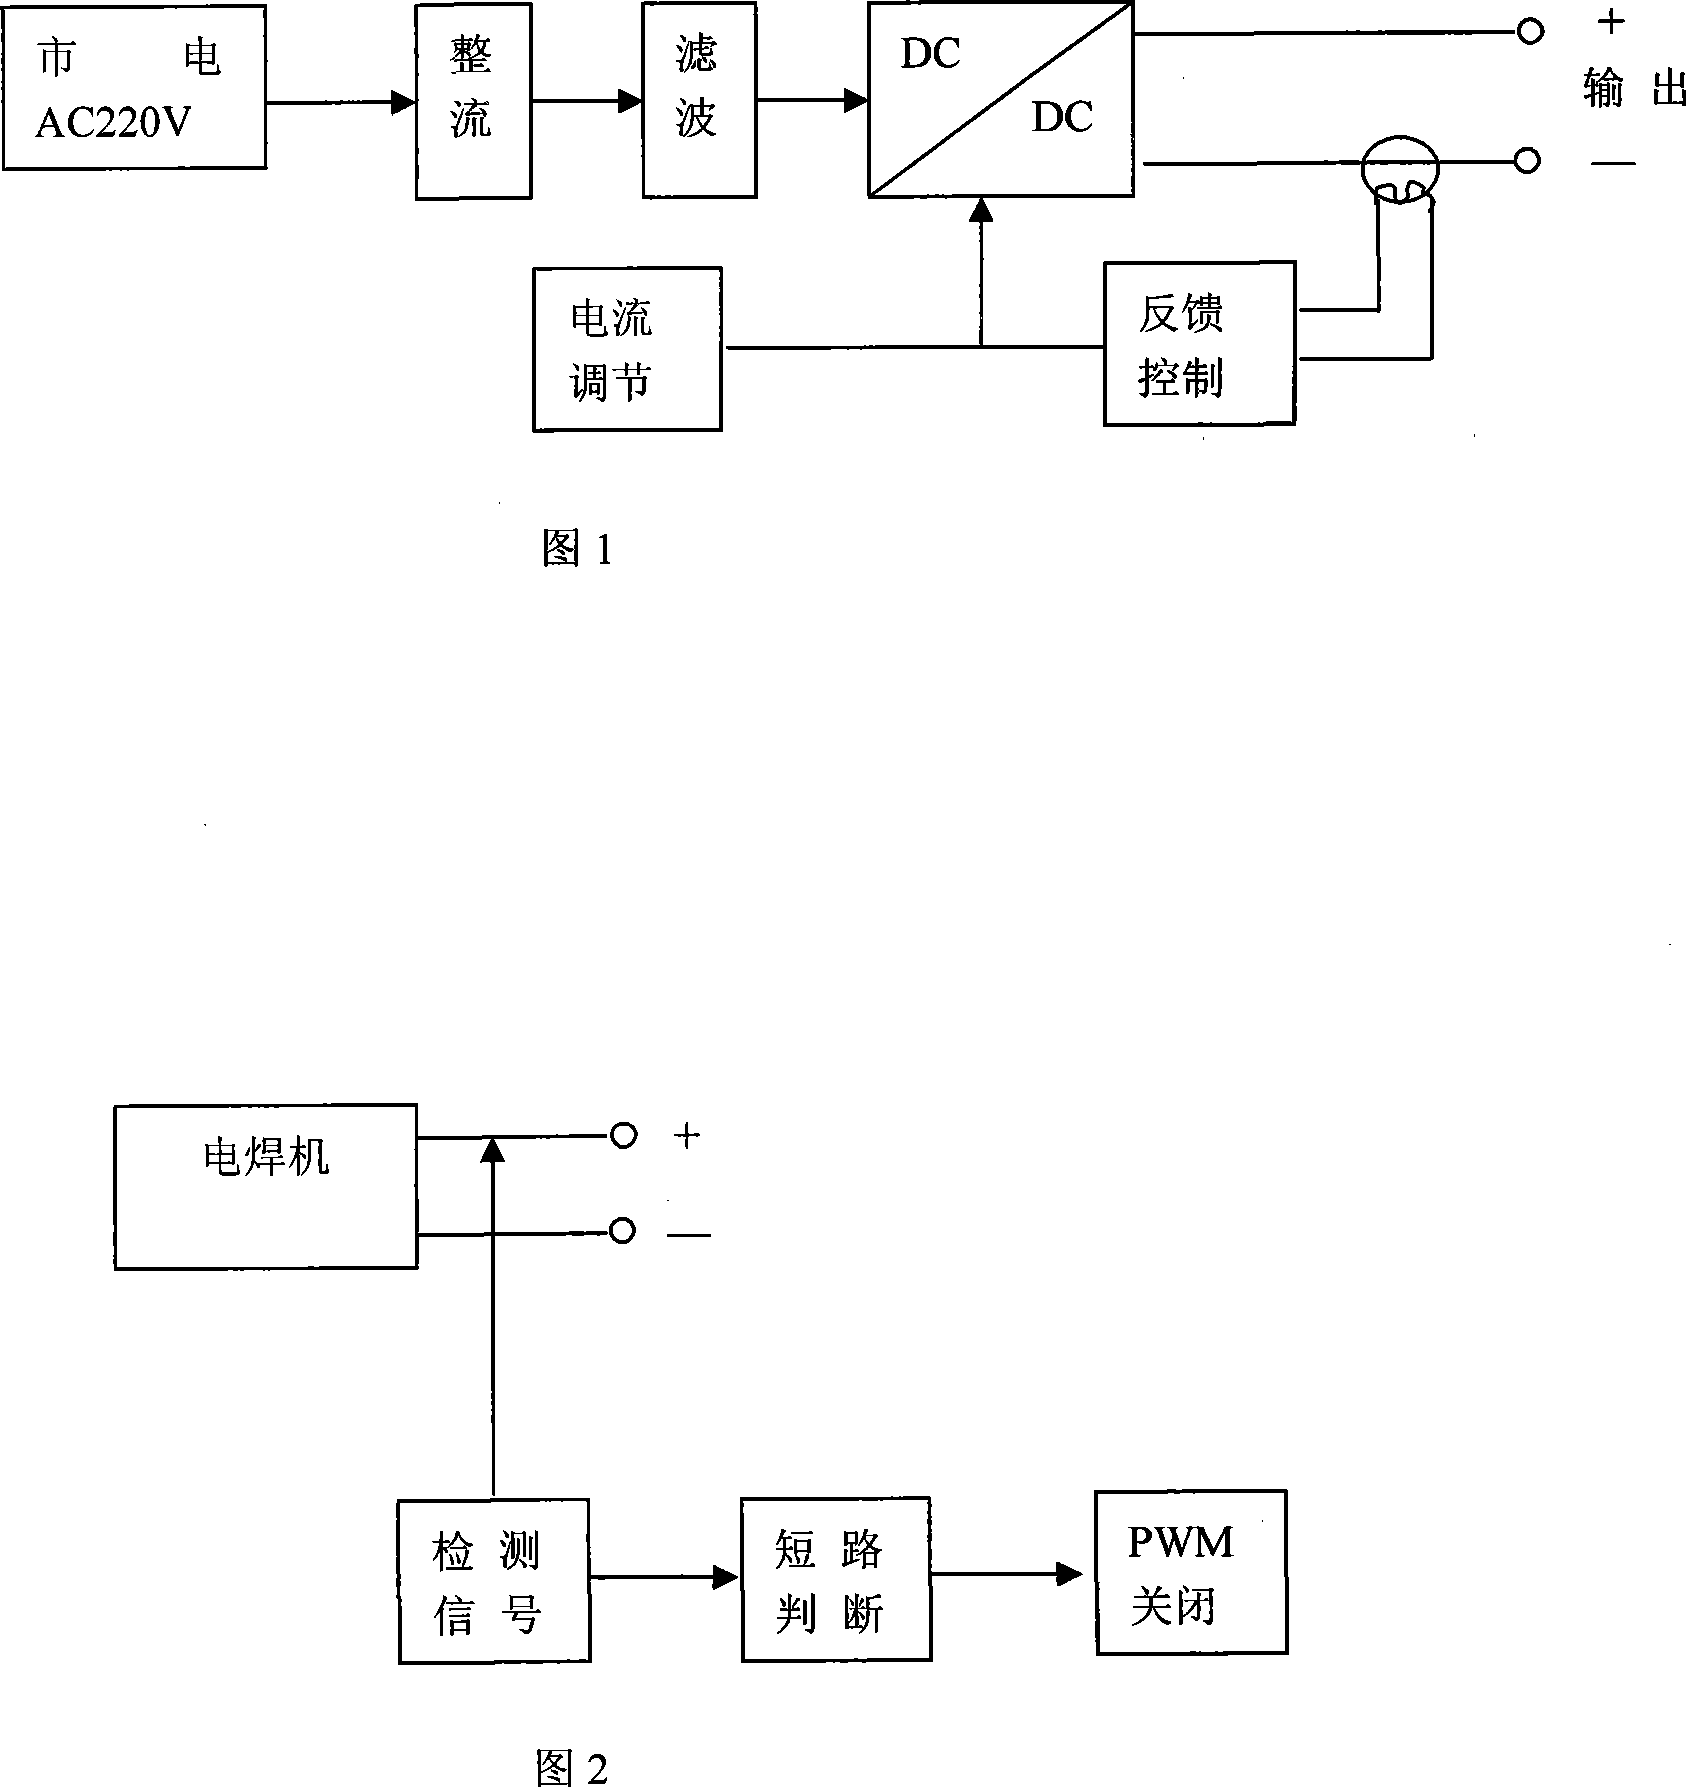 Short-circuit protection circuit of direct-current welding machine